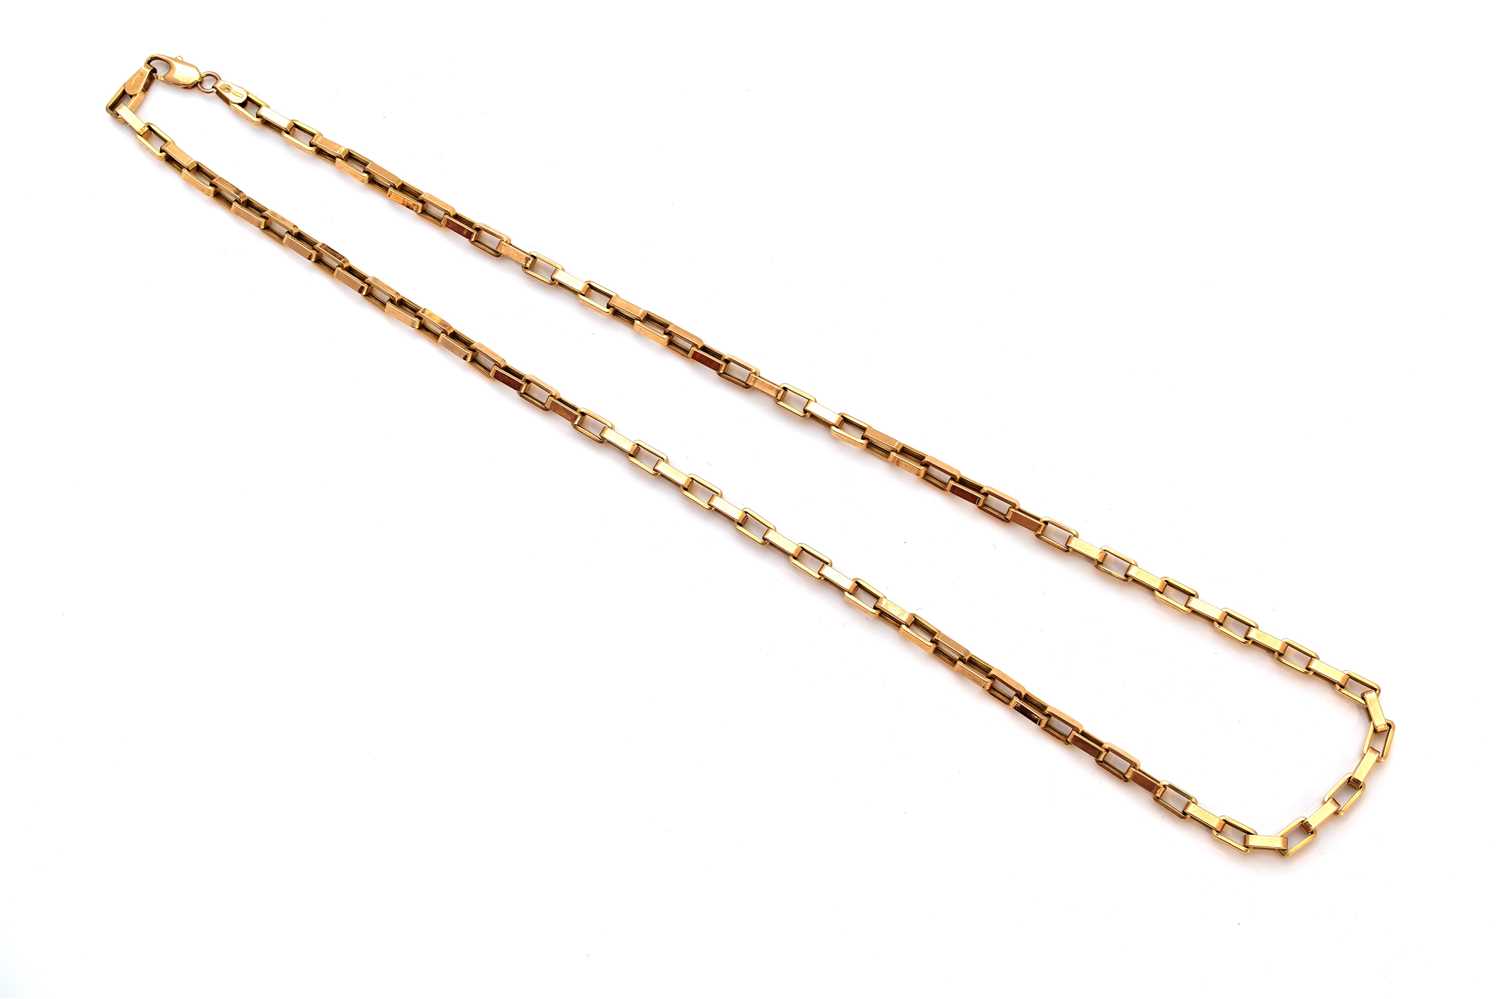 Lot 91 - A 9ct gold chain necklace by Unoaerre